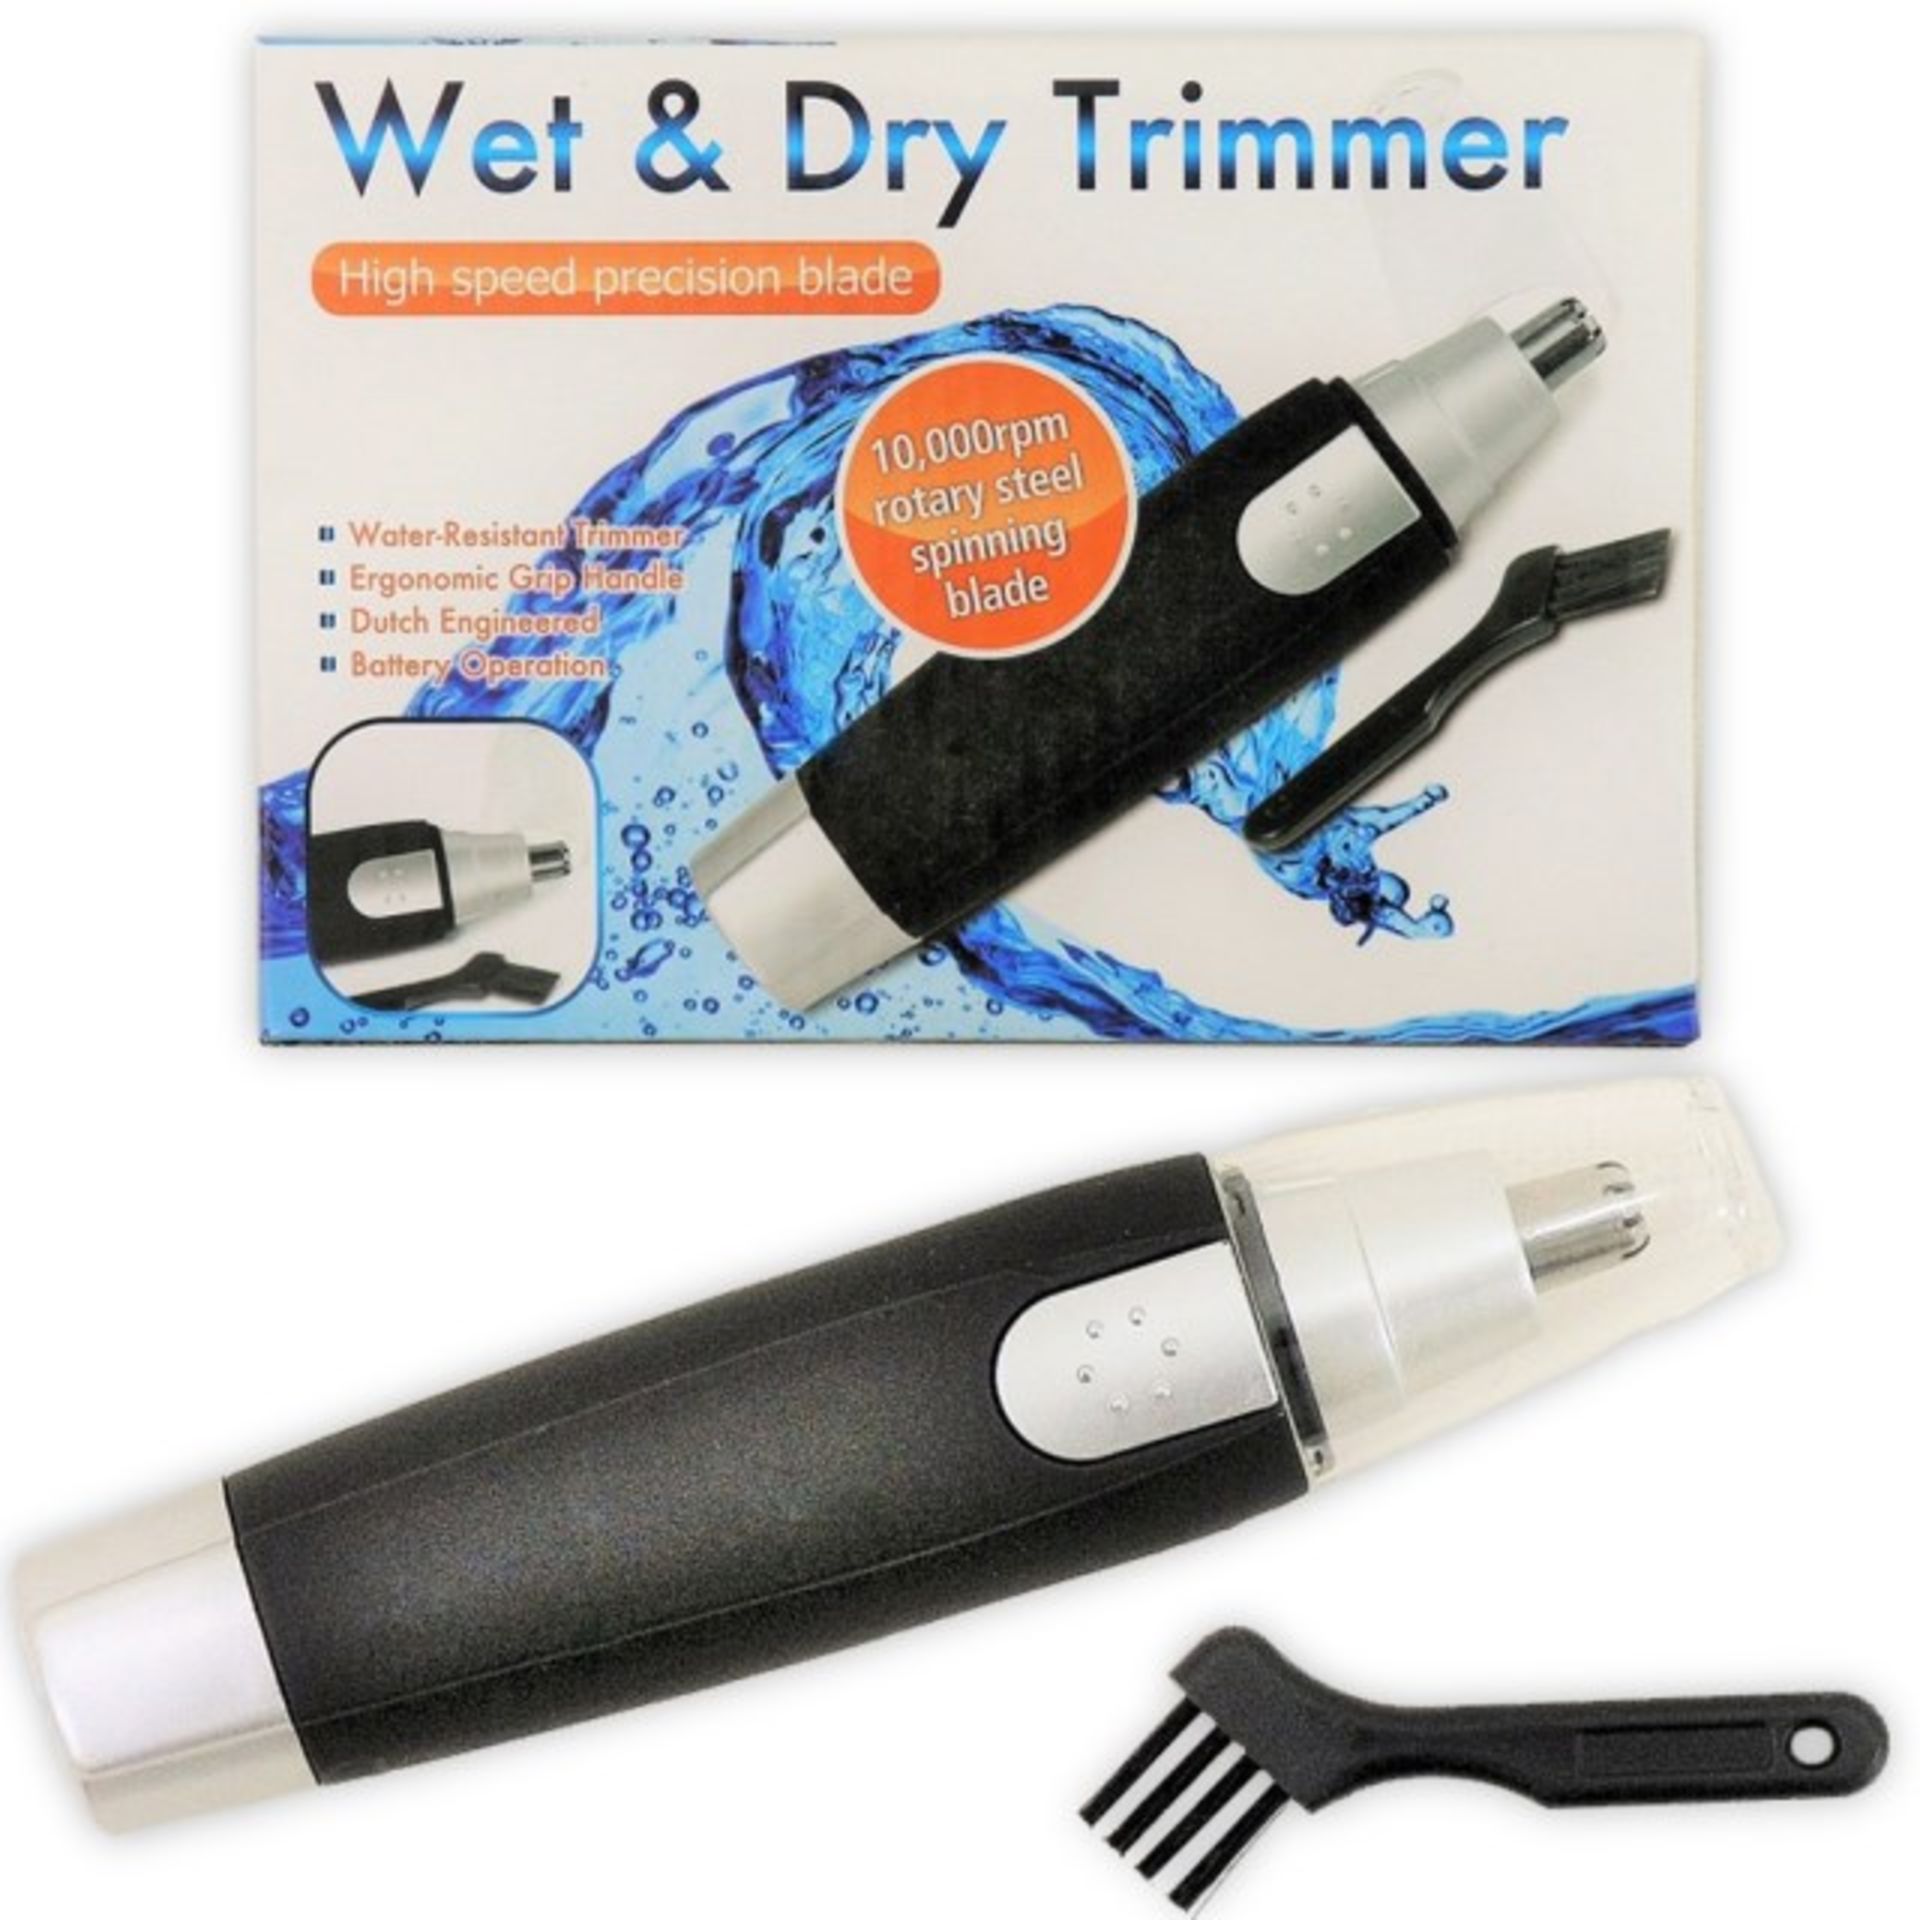 V *TRADE QTY* Brand New Wet & Dry Trimmer With Ergonomic Handle - Water Resistant - Dutch Engineered